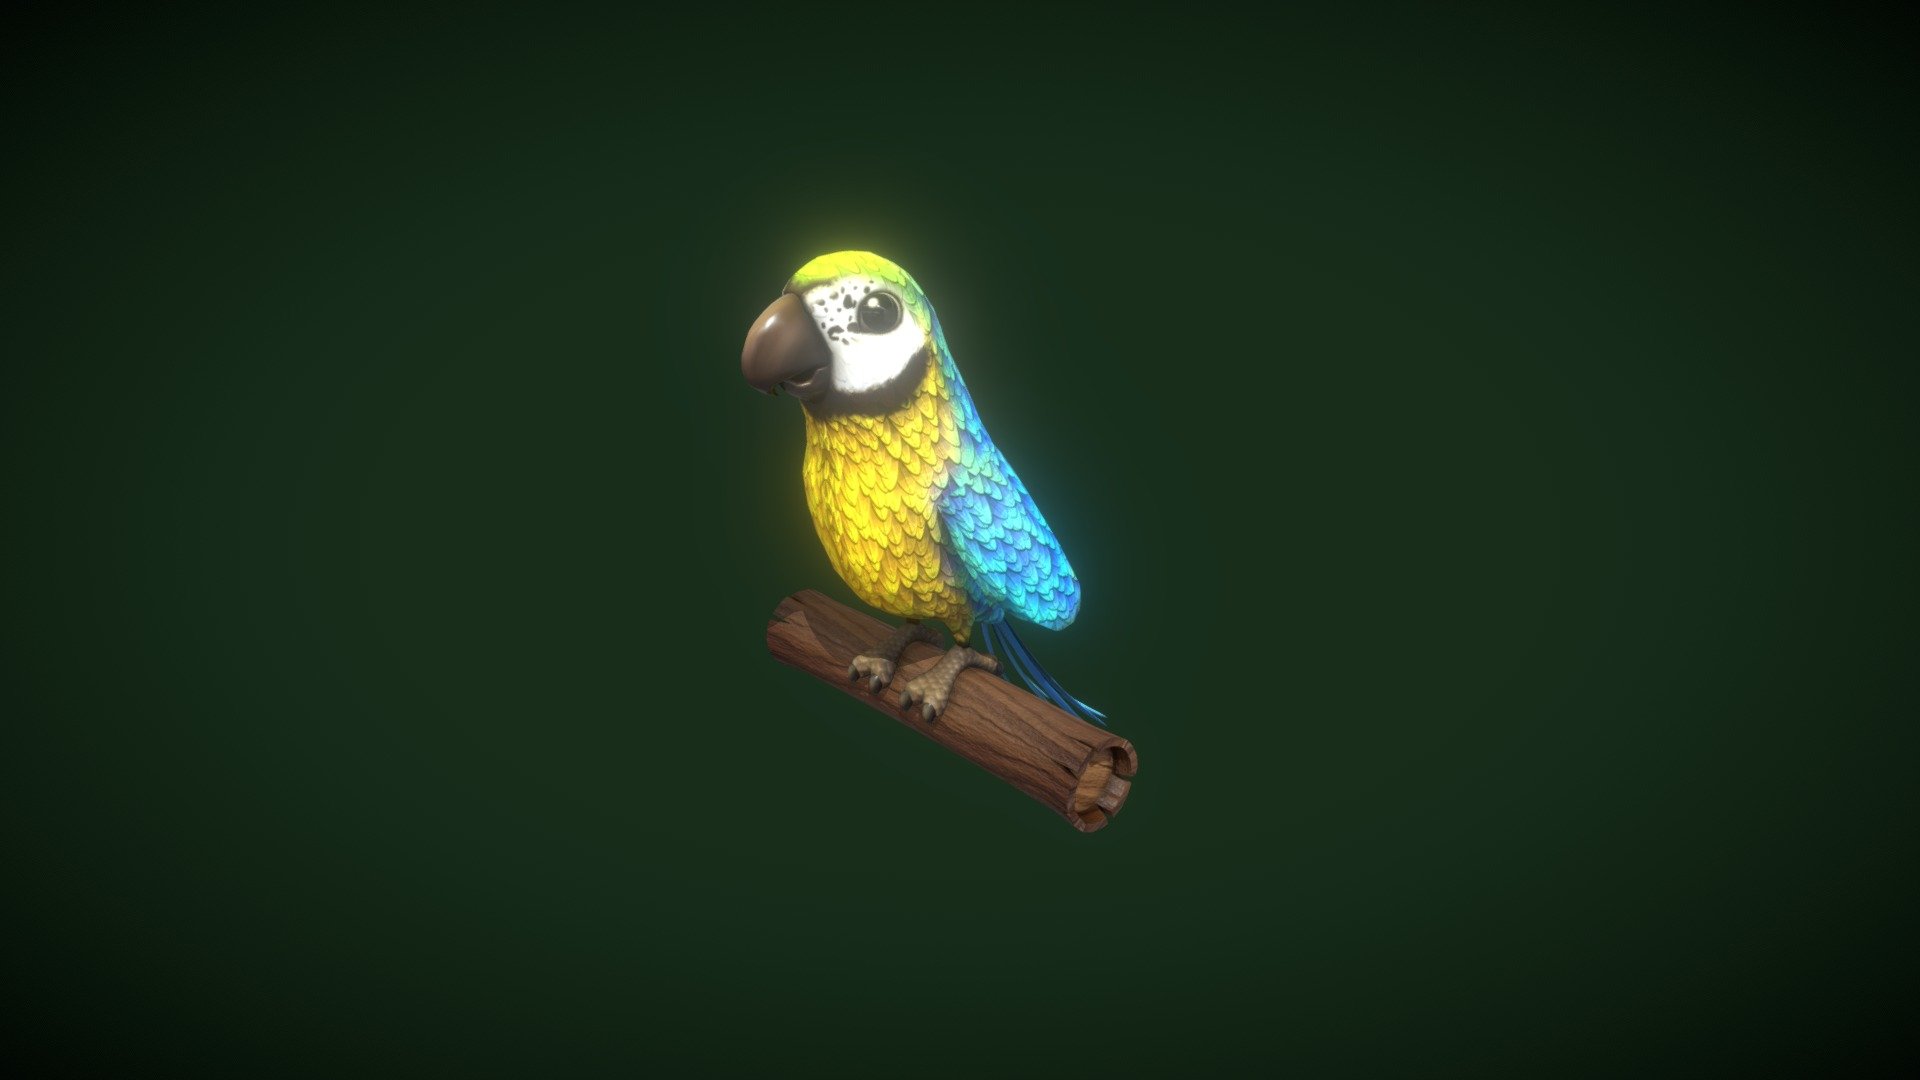 Cartoon Ara Parrot Yellow-Blue 3D Model is completely ready to be used in your games, animations, films, designs etc.  

All textures and materials are included and mapped in every format. The model is completely ready for use visualization in any 3d software and engine.  

Technical details:  




File formats included in the package are: FBX, OBJ, GLB, ABC, DAE, PLY, STL, BLEND, gLTF (generated), USDZ (generated)

Native software file format: BLEND

Render engine: Eevee

Parrot - Polygons: 4,275, Vertices: 3,983

Branch - Polygons: 268, Vertices: 250

Textures: Color, Metallic, Roughness, Normal, AO

All textures are 2k resolution.
 - Cartoon Ara Parrot Yellow-Blue 3D Model - Buy Royalty Free 3D model by 3DDisco 3d model